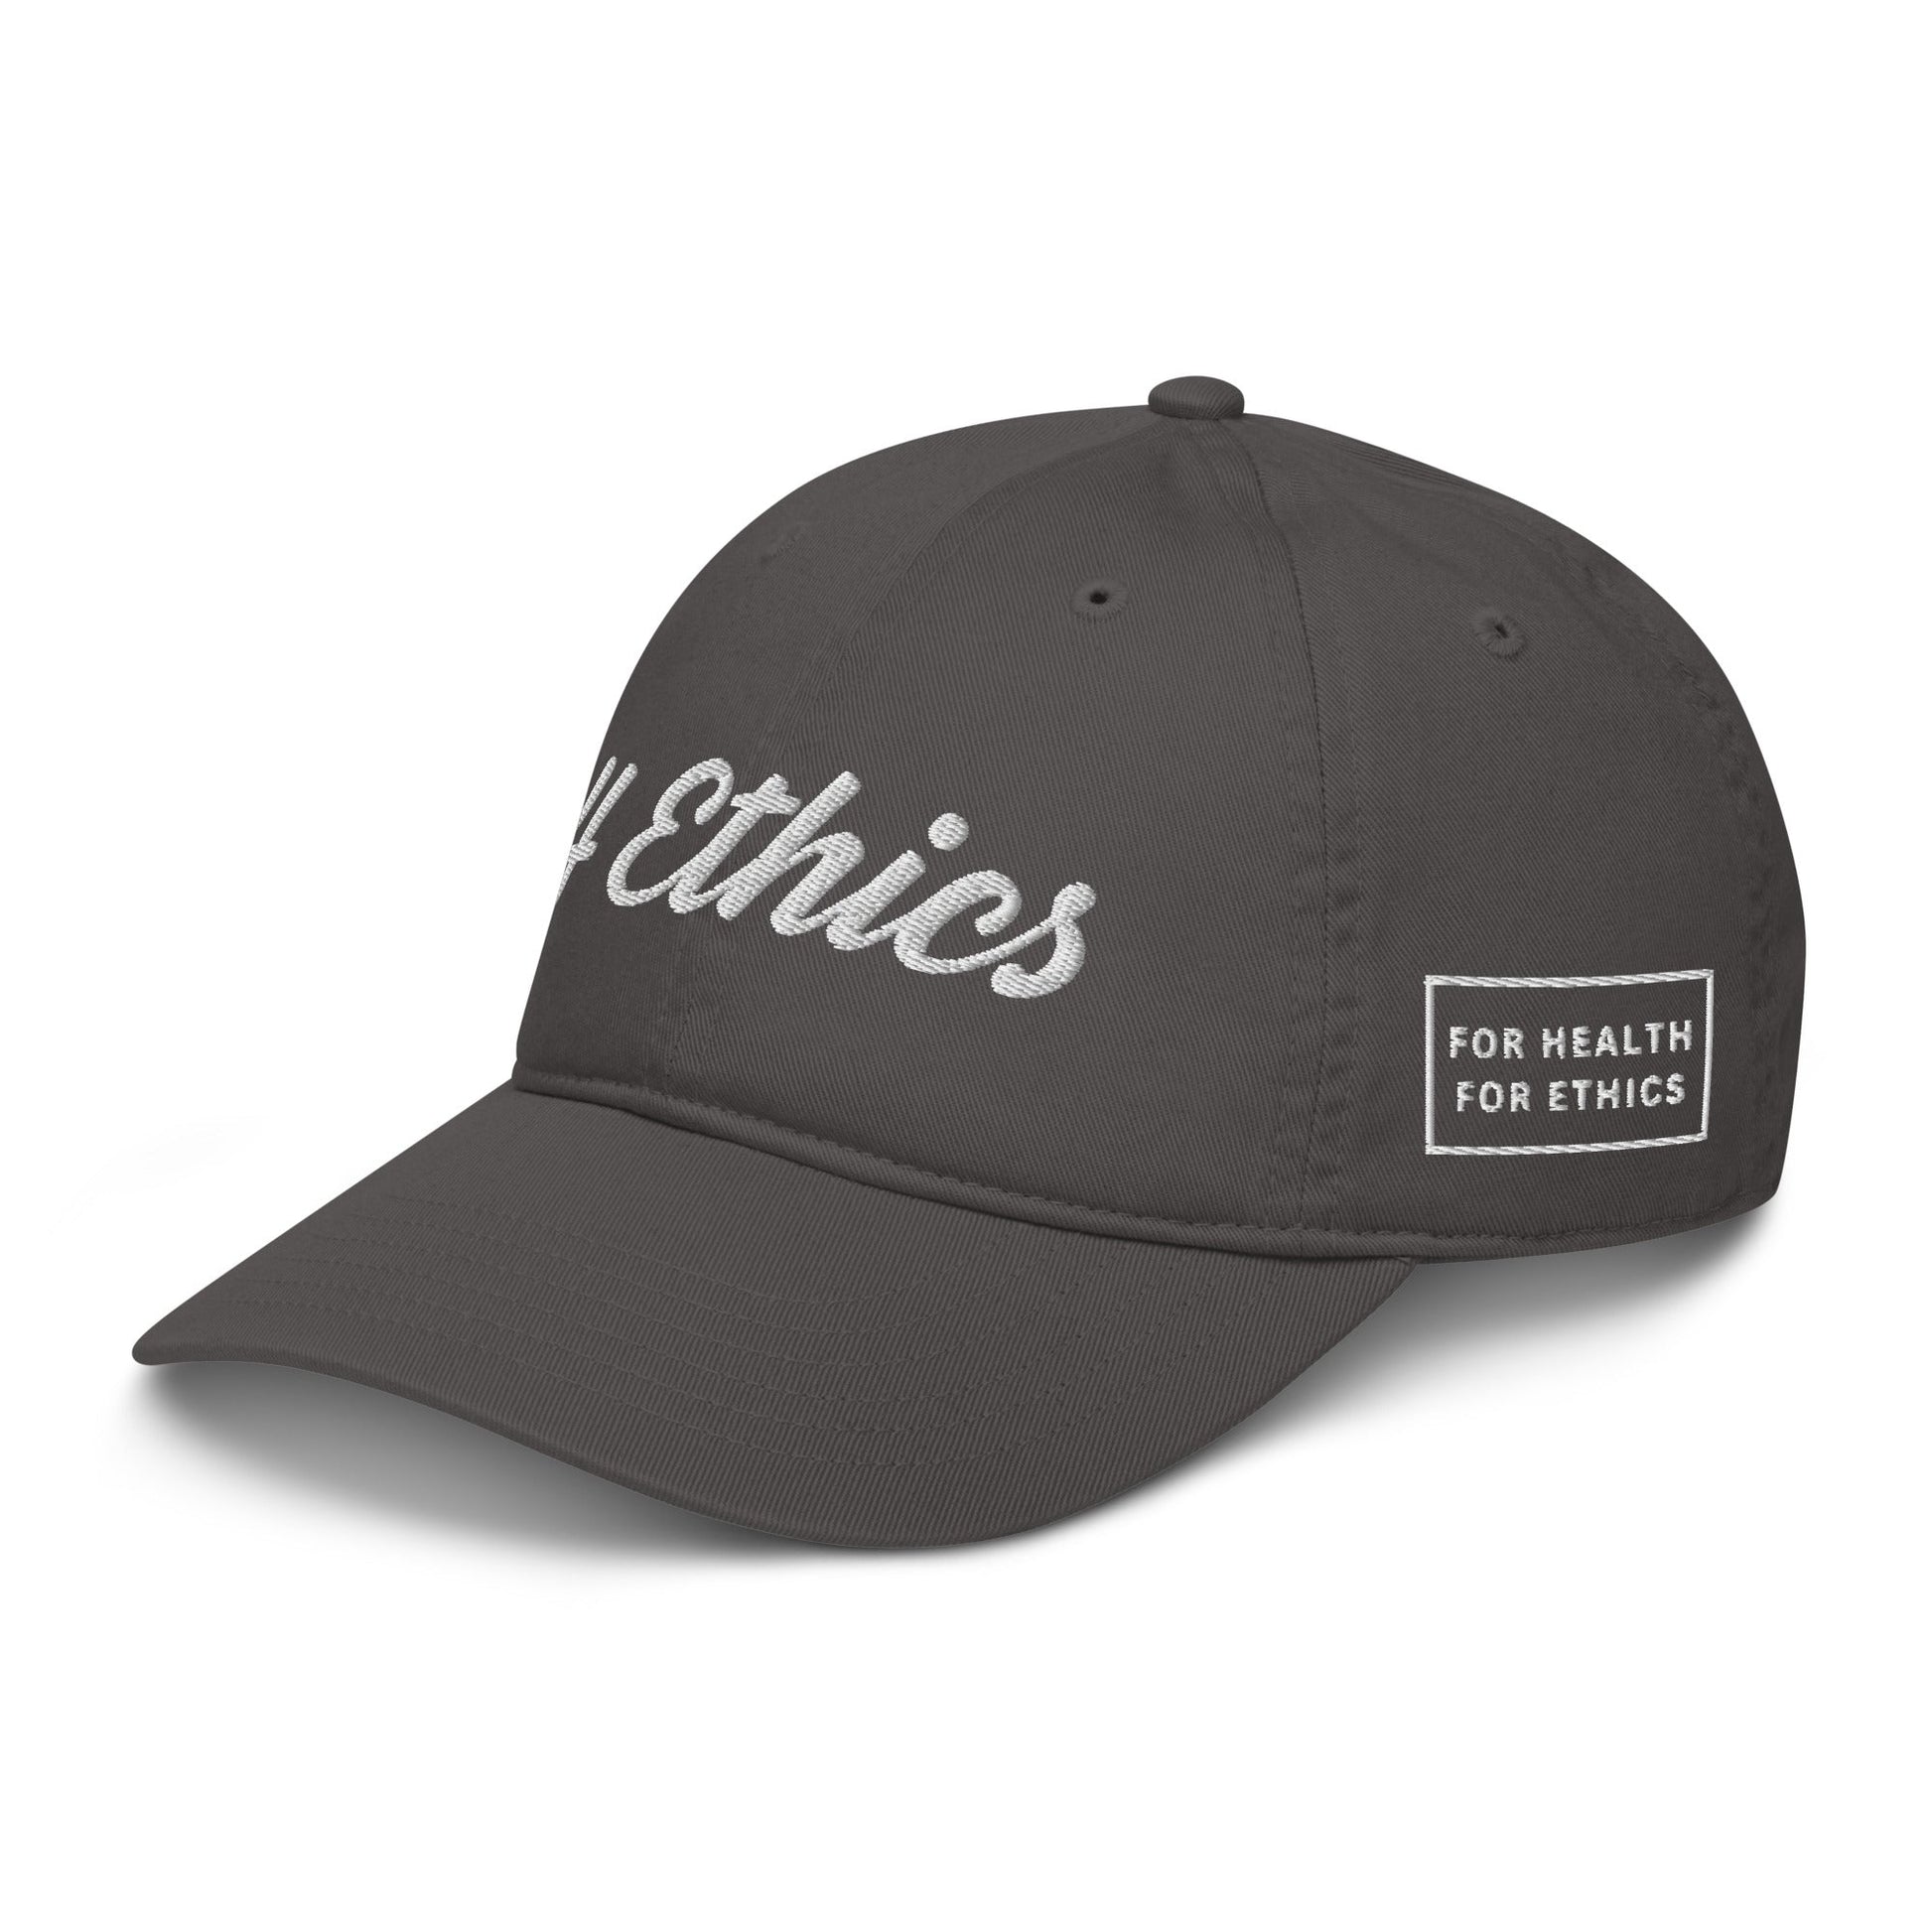 4 Ethics Organic Hat - For Health For Ethics - Charcoal - Other Side